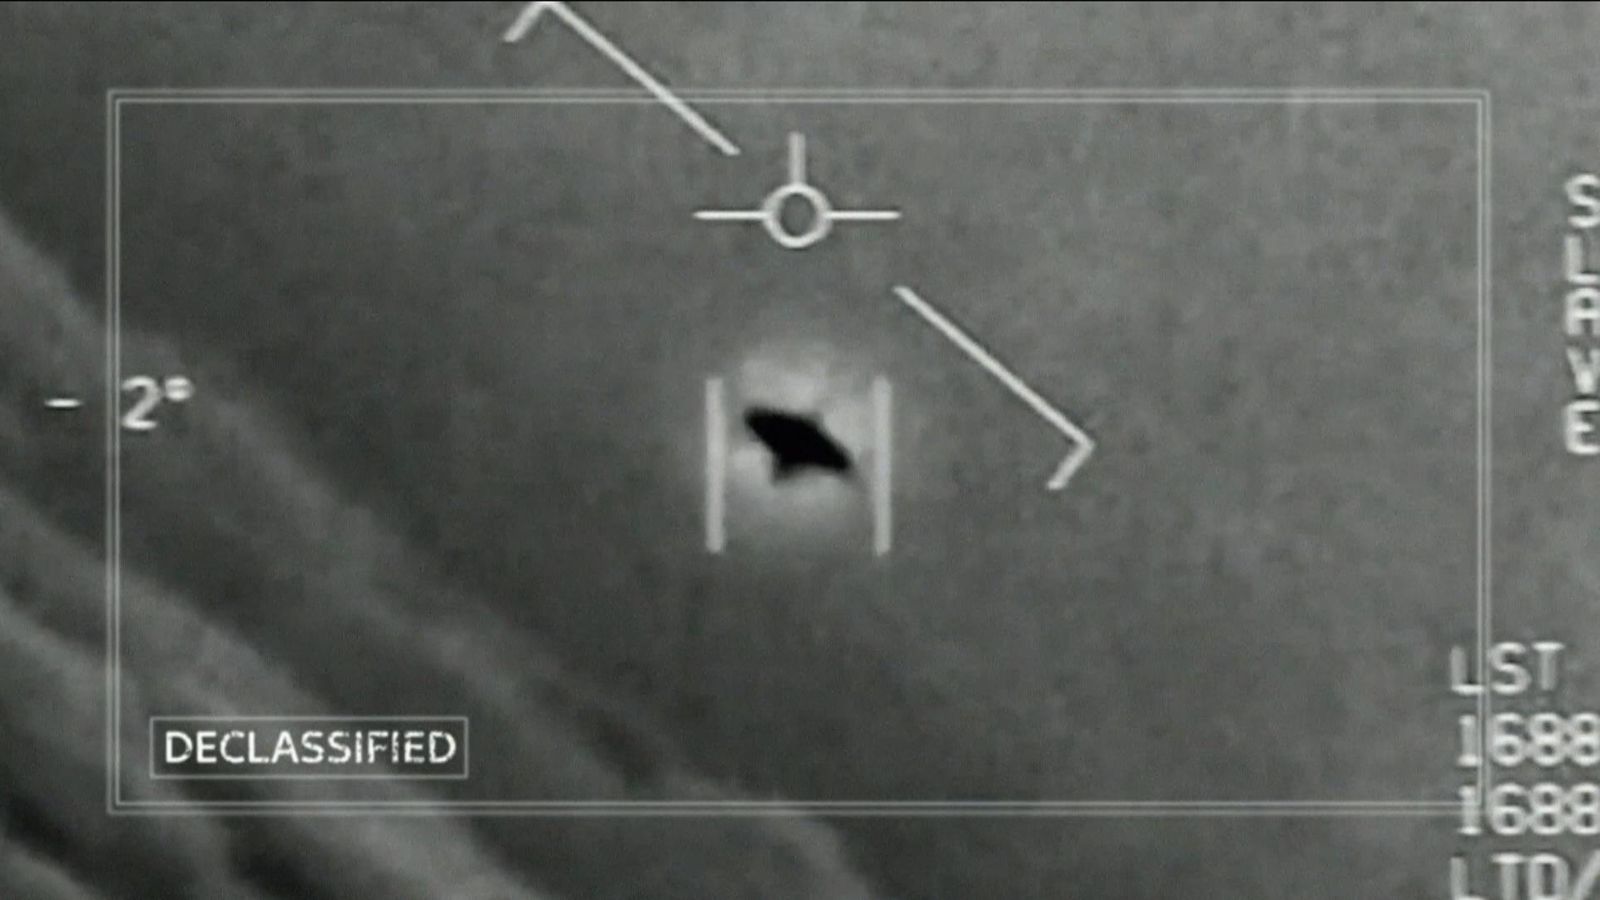 Pentagon UFO report: Not enough evidence to rule if extra-terrestrial life  exists or not, officials say | US News | Sky News